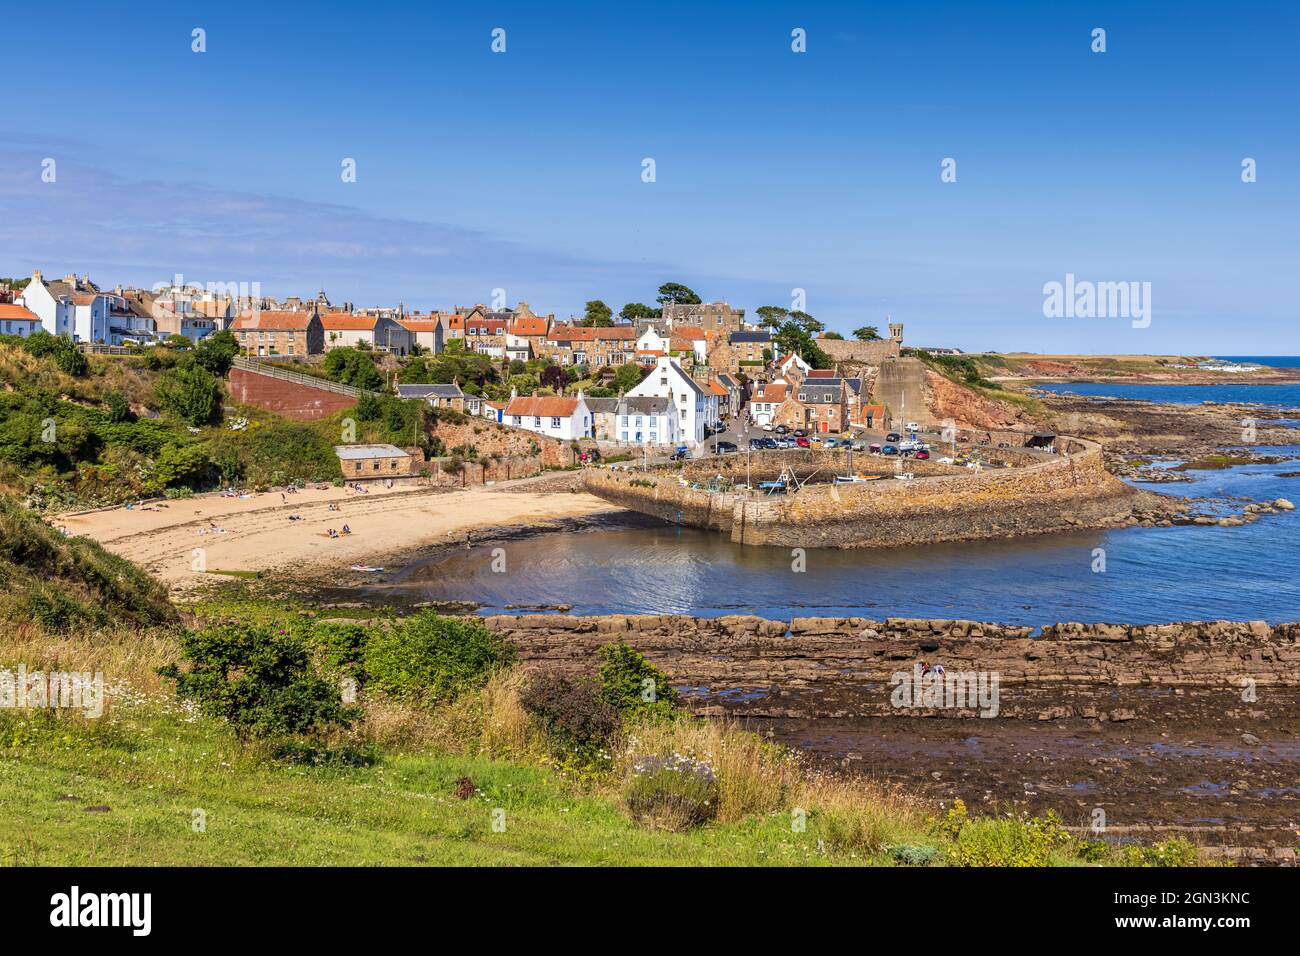 The historic fishing village of Crail, with its picturesque harbour, on the east coast of Fife, Scotland. Stock Photo